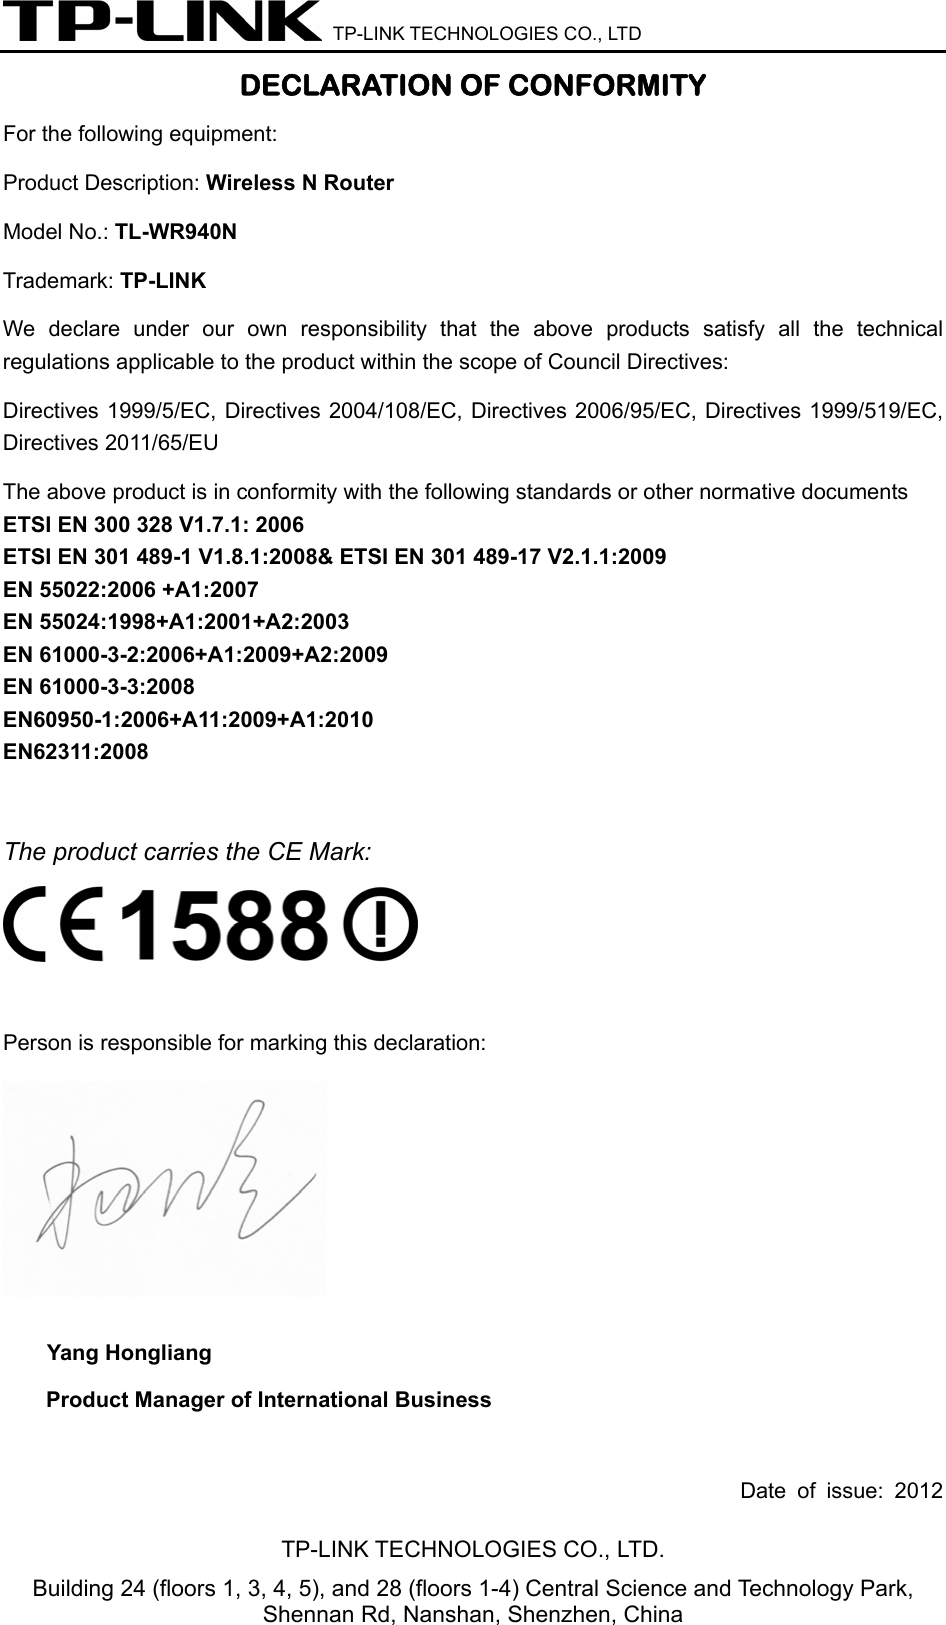  TP-LINK TECHNOLOGIES CO., LTD DECLARATION OF CONFORMITY For the following equipment:   Product Description: Wireless N Router Model No.: TL-WR940N Trademark: TP-LINK    We declare under our own responsibility that the above products satisfy all the technical regulations applicable to the product within the scope of Council Directives:     Directives 1999/5/EC, Directives 2004/108/EC, Directives 2006/95/EC, Directives 1999/519/EC, Directives 2011/65/EU The above product is in conformity with the following standards or other normative documents ETSI EN 300 328 V1.7.1: 2006 ETSI EN 301 489-1 V1.8.1:2008&amp; ETSI EN 301 489-17 V2.1.1:2009 EN 55022:2006 +A1:2007 EN 55024:1998+A1:2001+A2:2003 EN 61000-3-2:2006+A1:2009+A2:2009 EN 61000-3-3:2008 EN60950-1:2006+A11:2009+A1:2010 EN62311:2008  The product carries the CE Mark:   Person is responsible for marking this declaration:  Yang Hongliang Product Manager of International Business    Date of issue: 2012 TP-LINK TECHNOLOGIES CO., LTD. Building 24 (floors 1, 3, 4, 5), and 28 (floors 1-4) Central Science and Technology Park, Shennan Rd, Nanshan, Shenzhen, China 